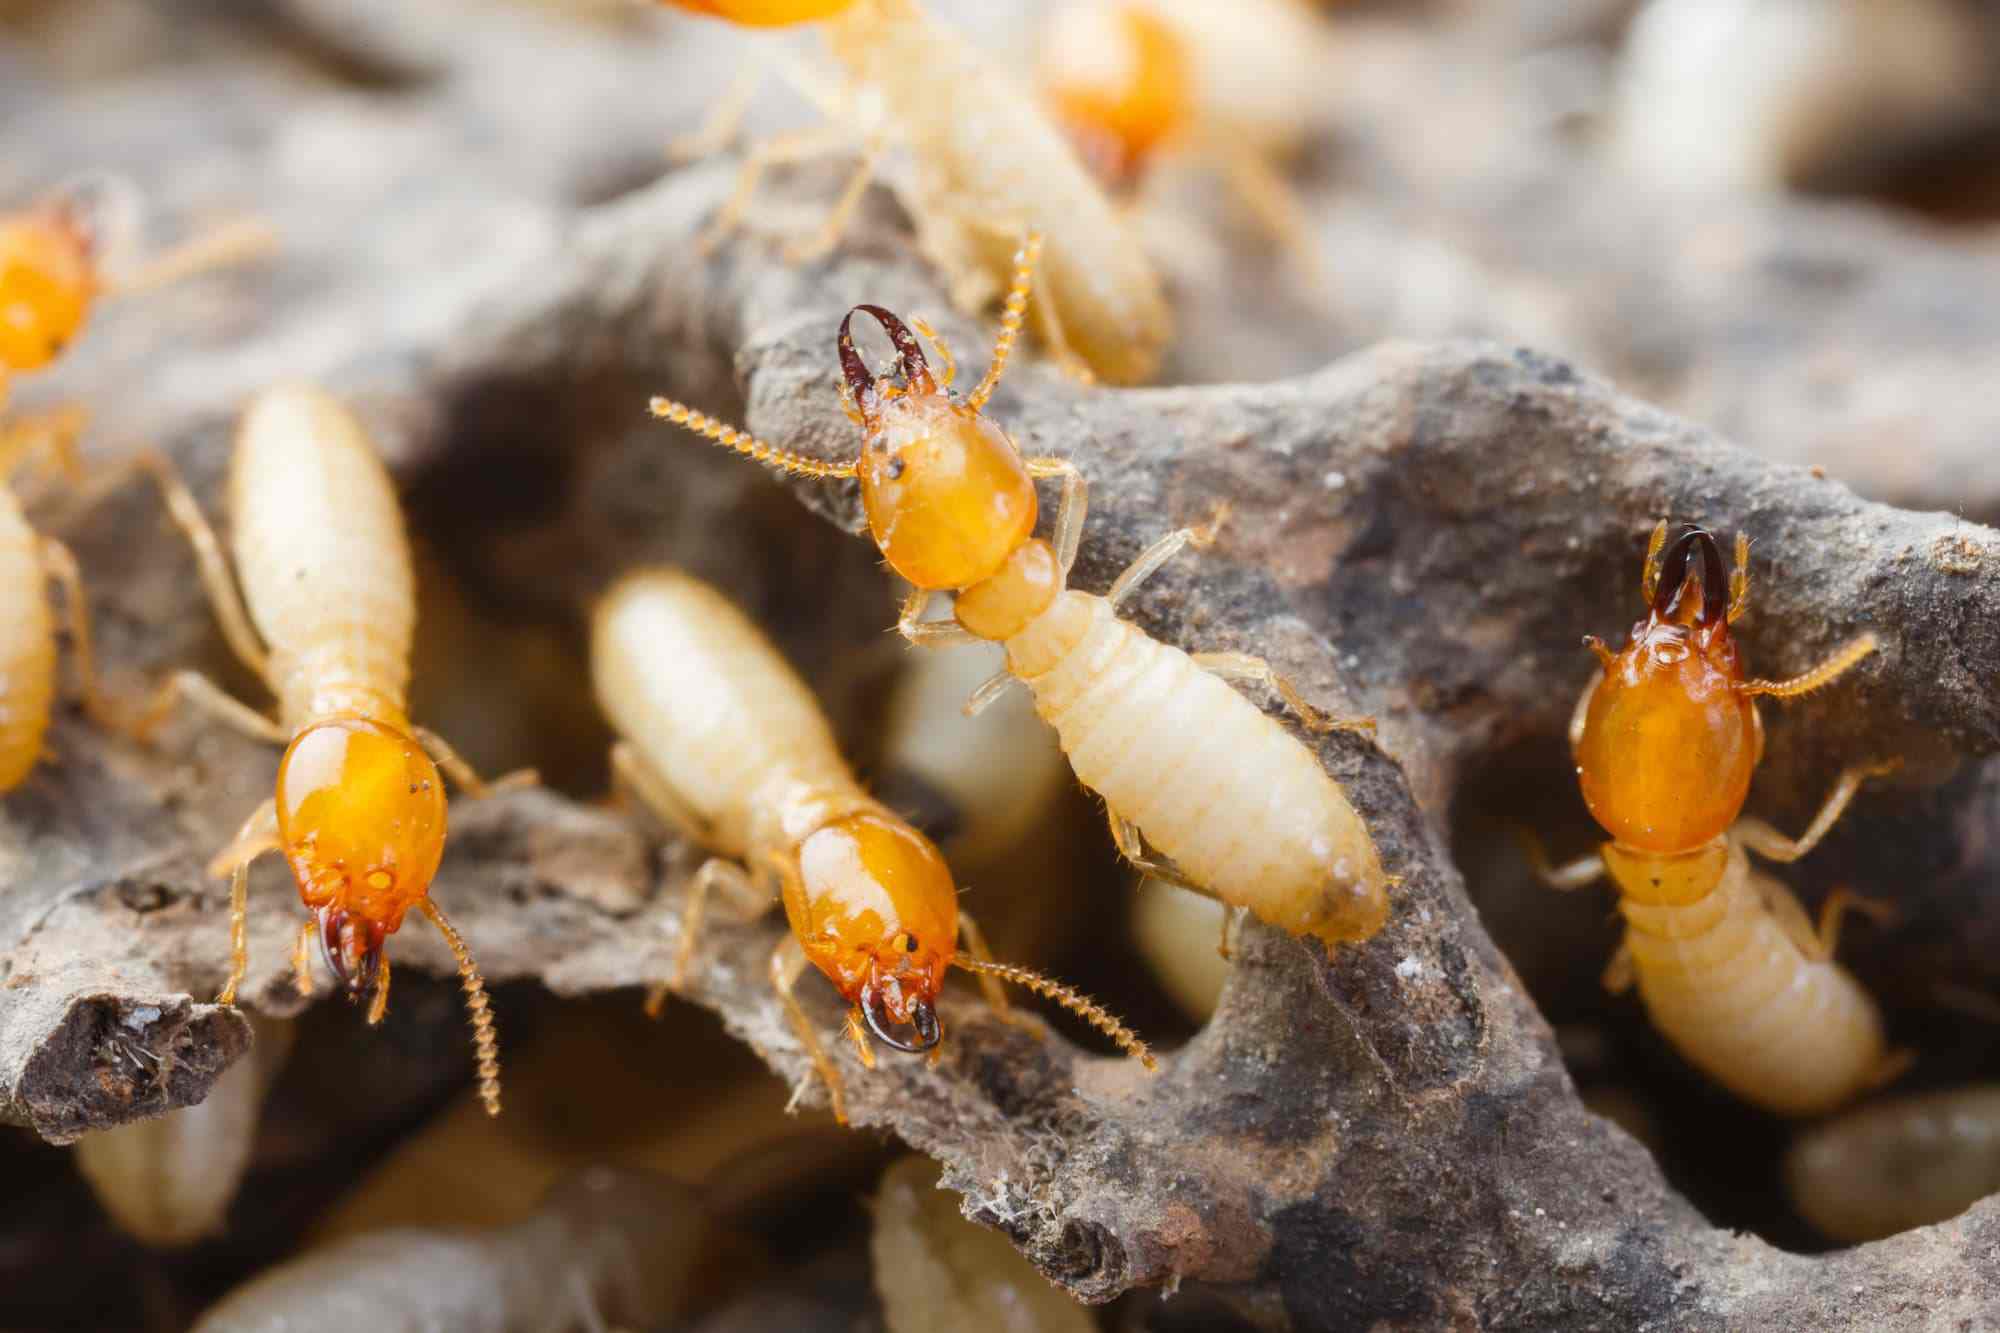 The Ultimate Technique To Eliminate Termites In Your Wall - Say Goodbye To Infestations!